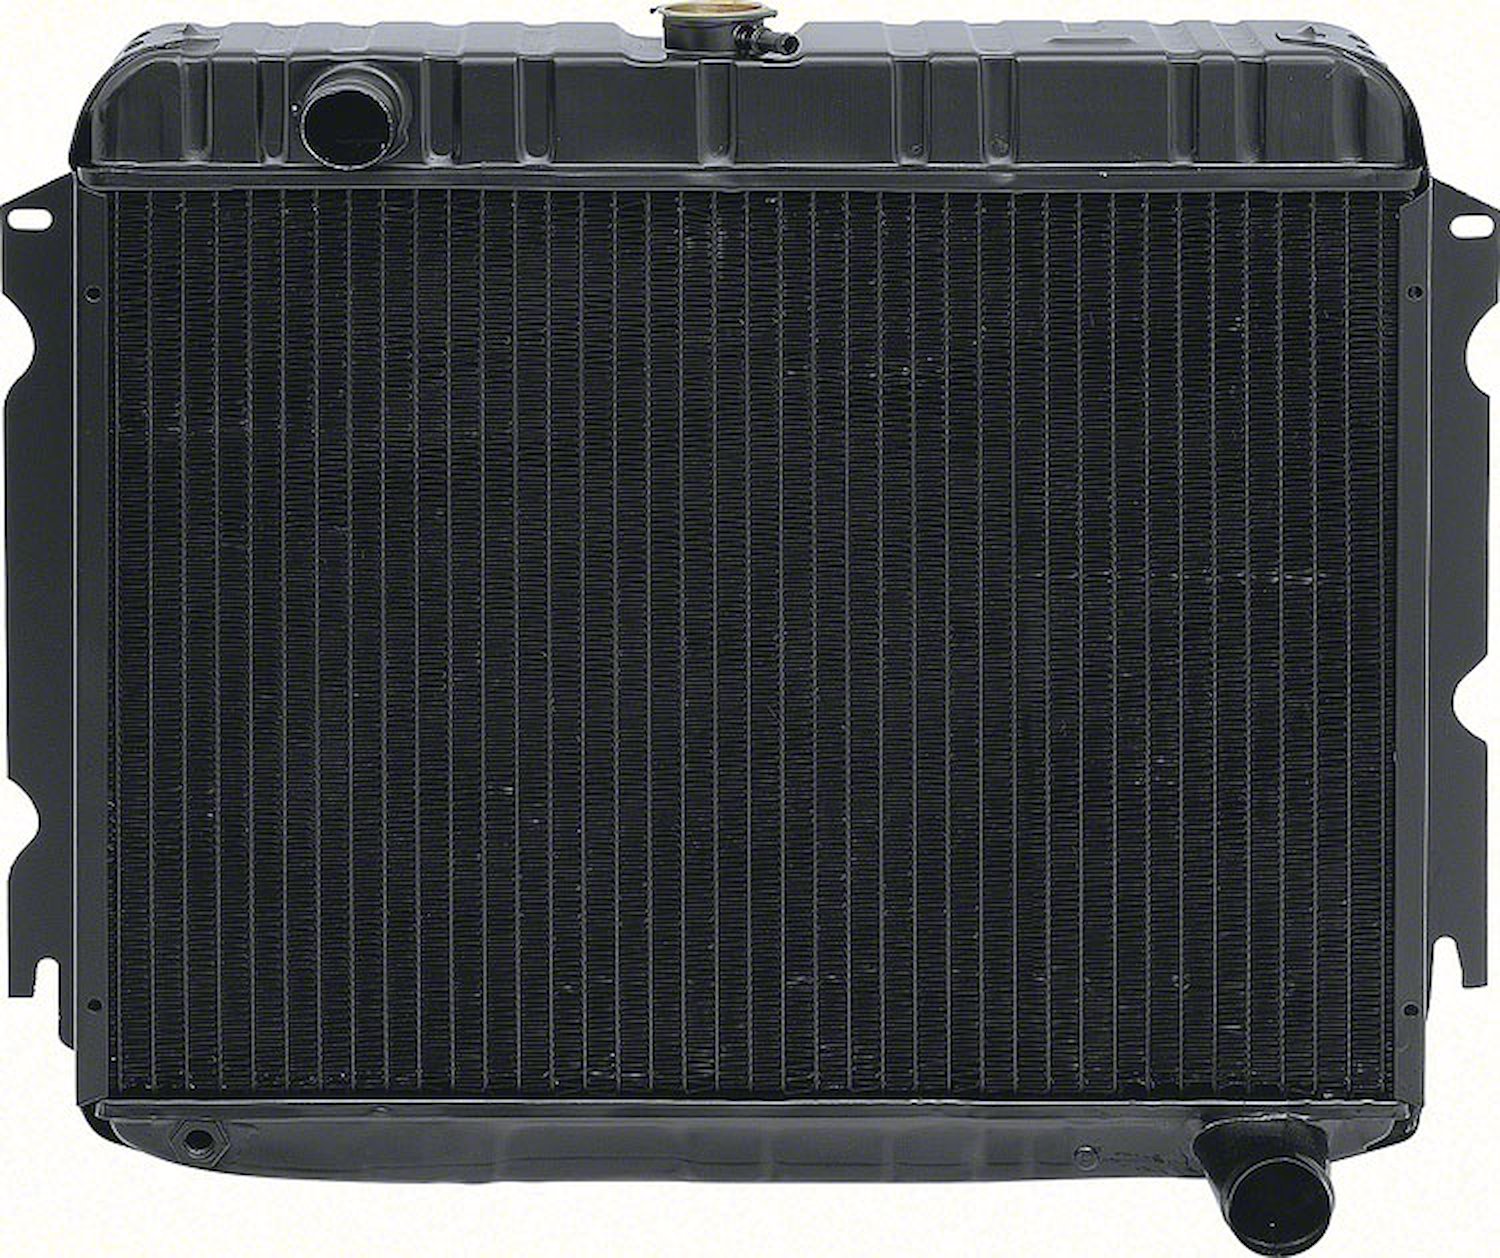 MA2261S Replacement Radiator 1970-72 Mopar A-Body Small Block V8 With Standard Trans 4 Row